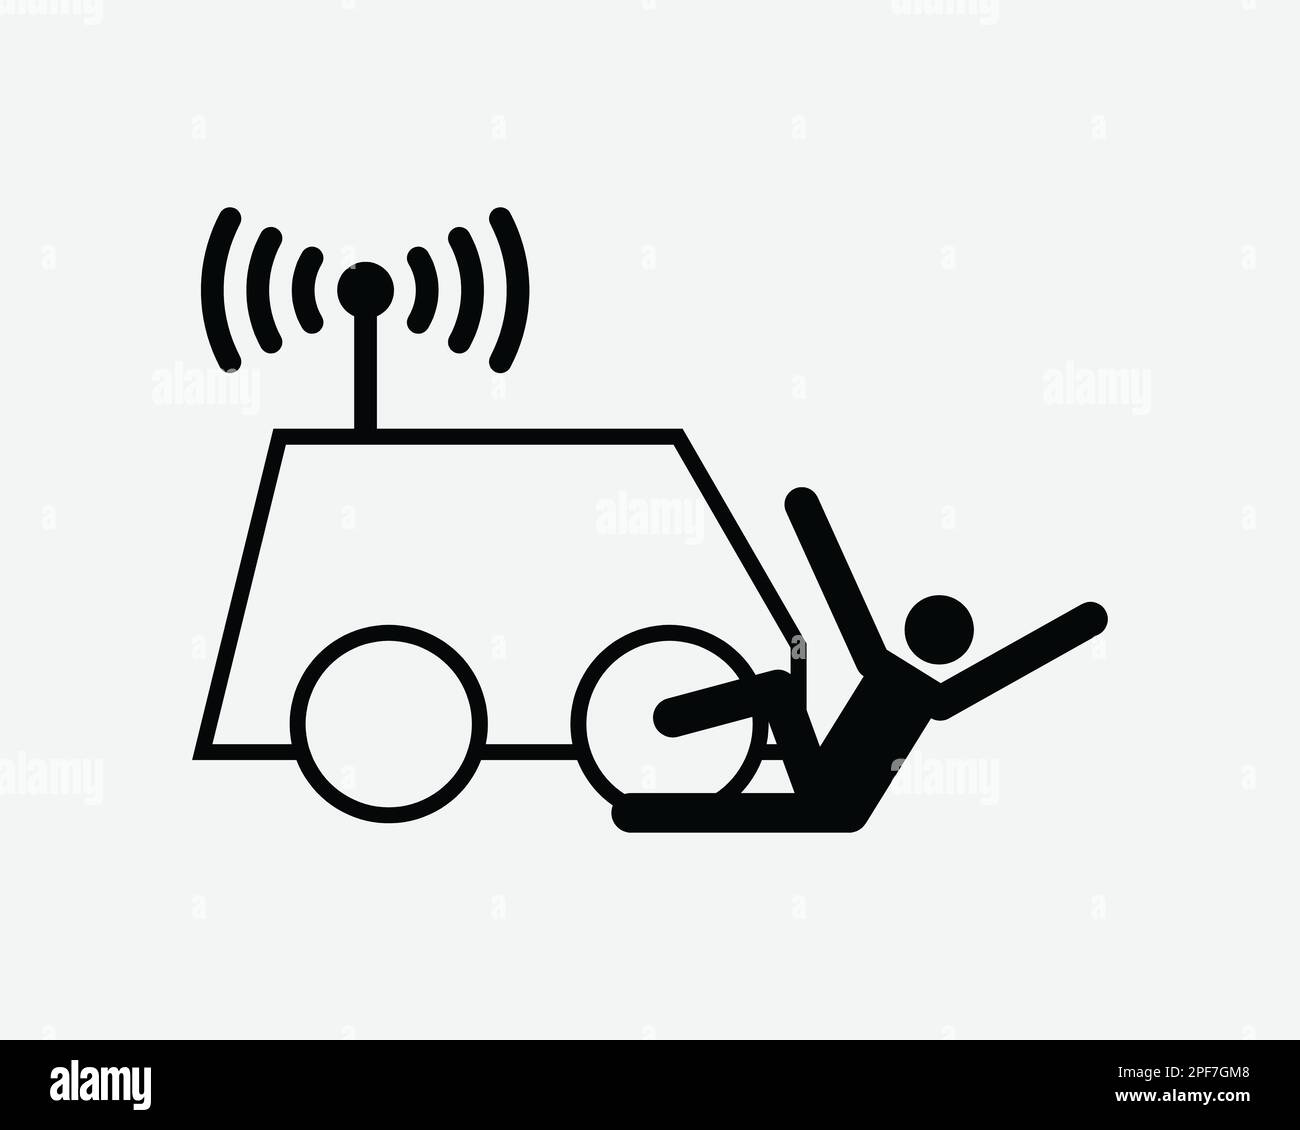 Self-Driving Car Accident Icon Injury Safety Hazard Dangers Black White Silhouette Symbol Sign Graphic Clipart Artwork Illustration Pictogram Vector Stock Vector